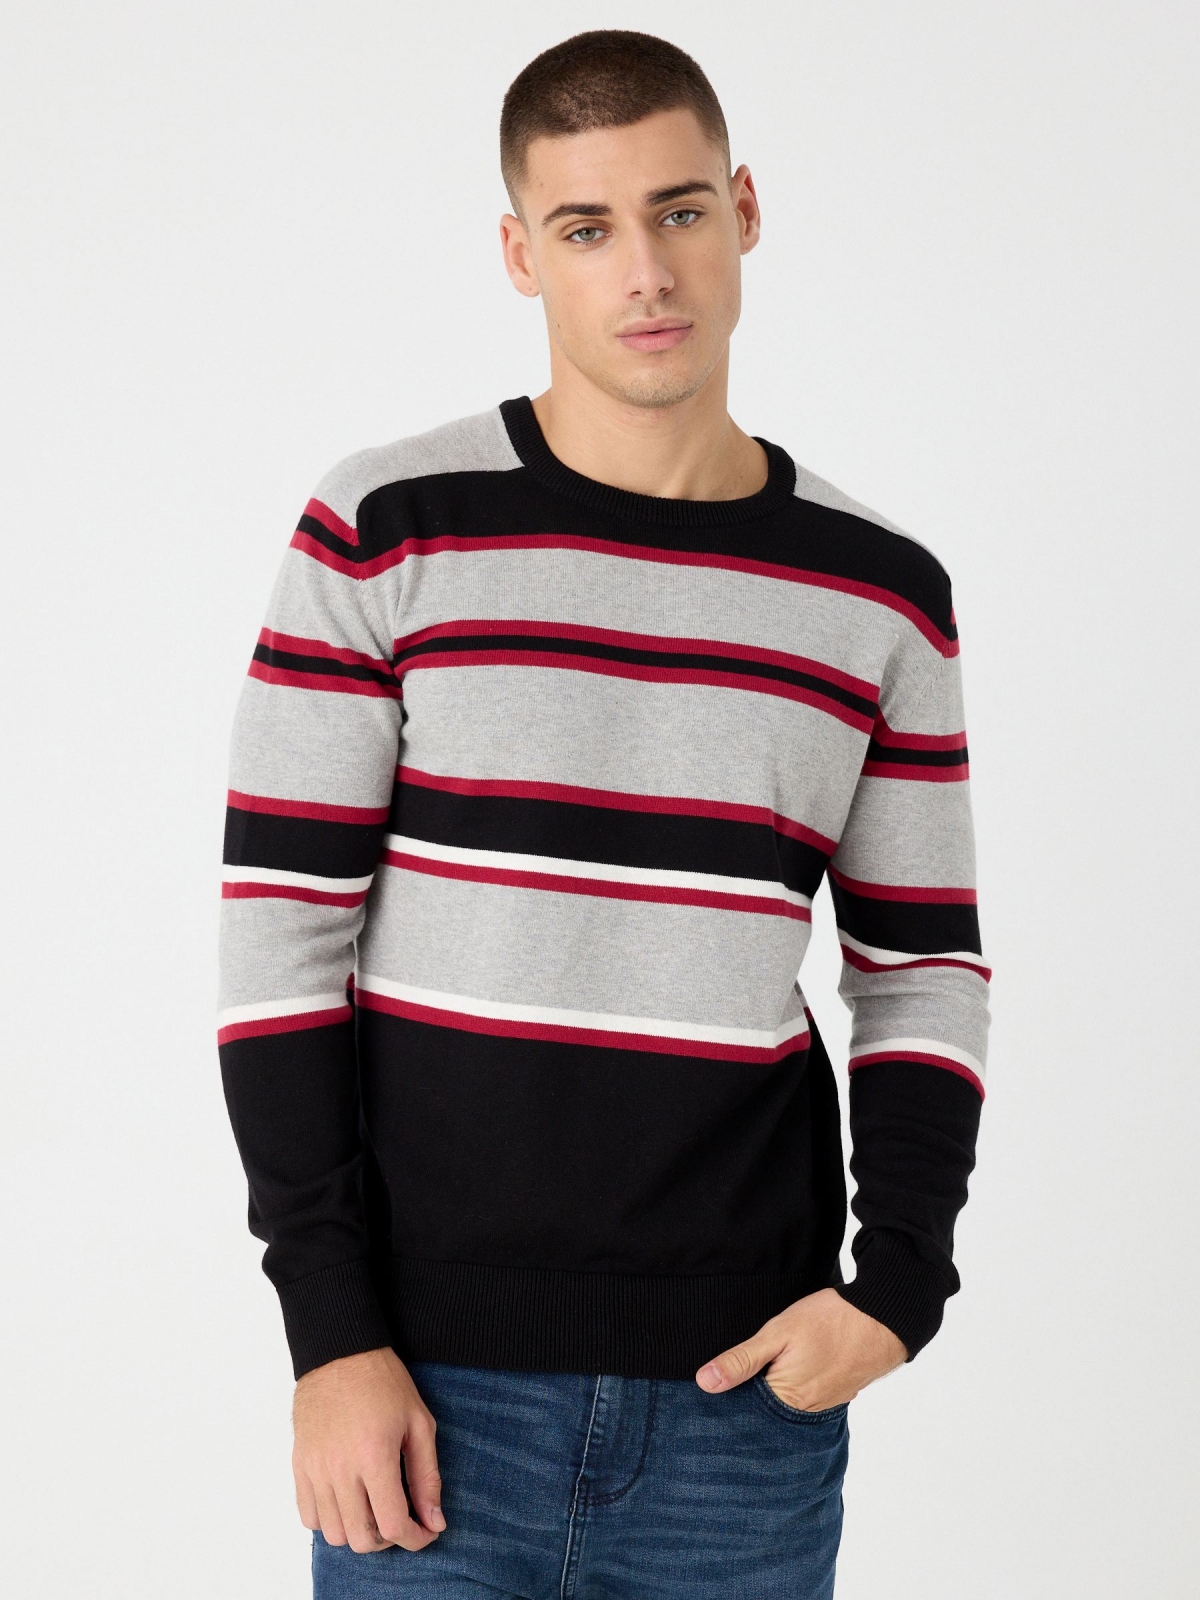 Striped knitted sweater black middle front view